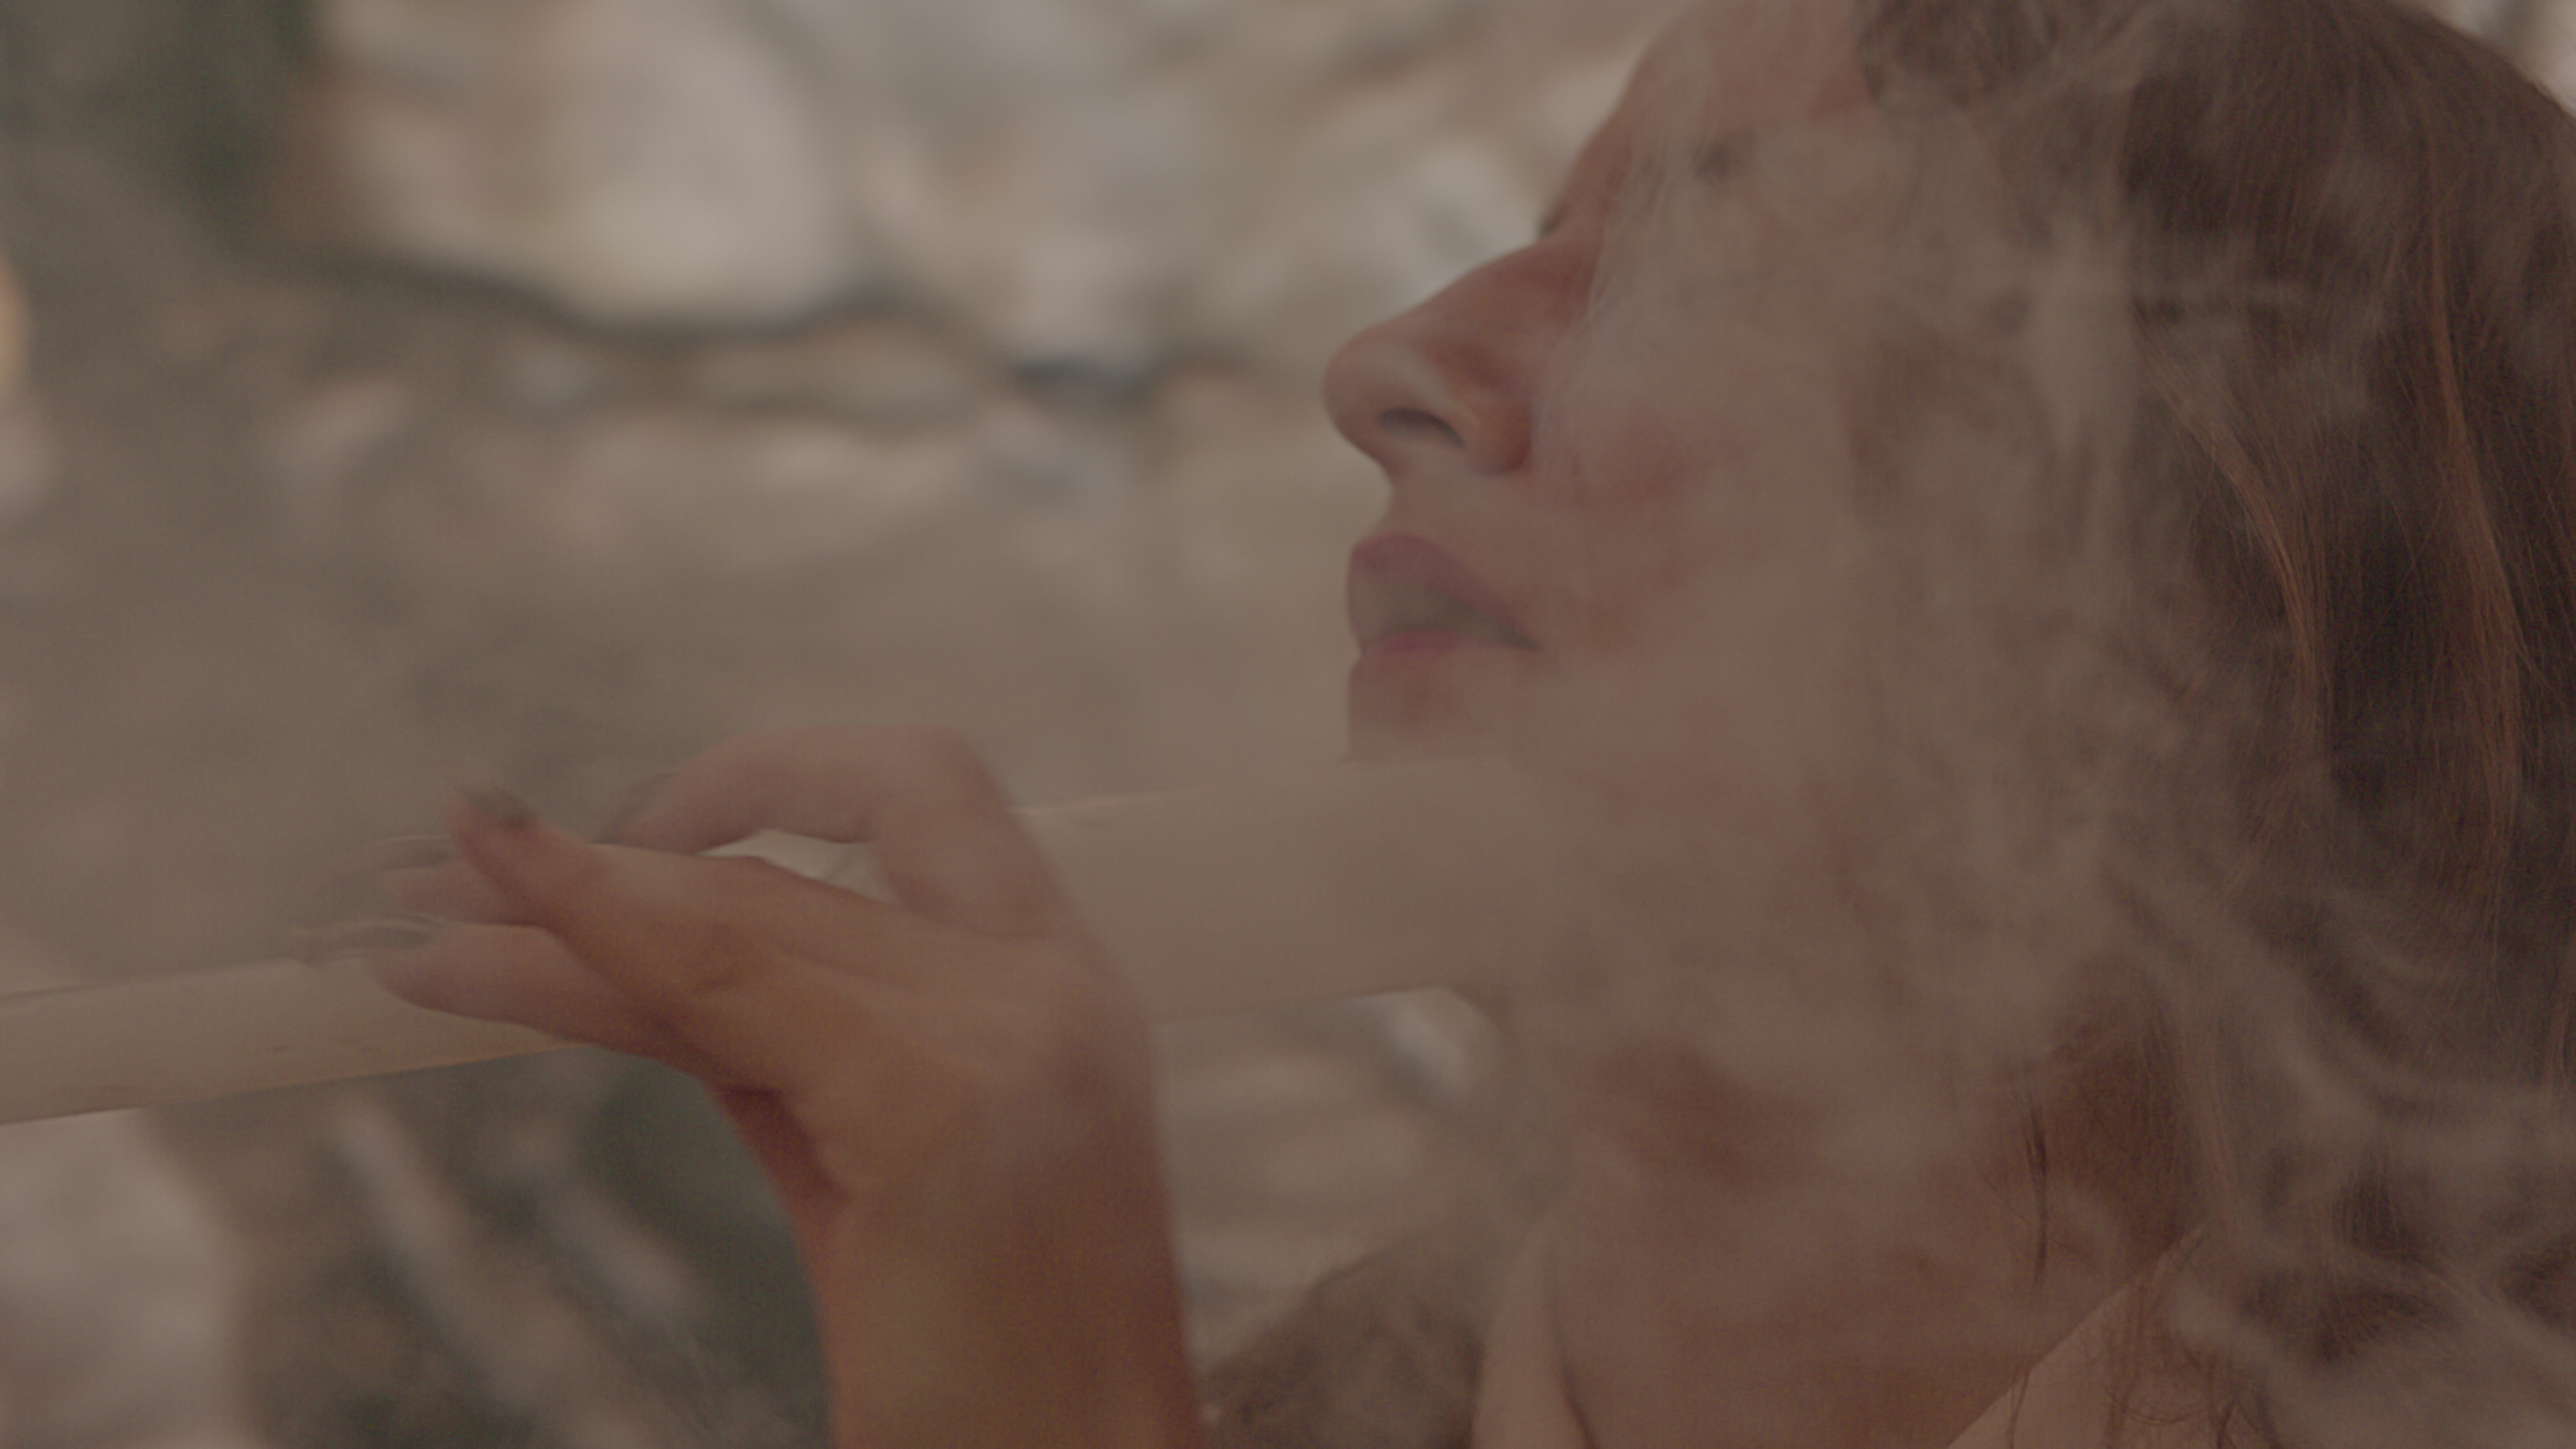 GETTING HIGH WITH SOME MUMMY: LAURA GOZLAN’S REJUVENATION CURE